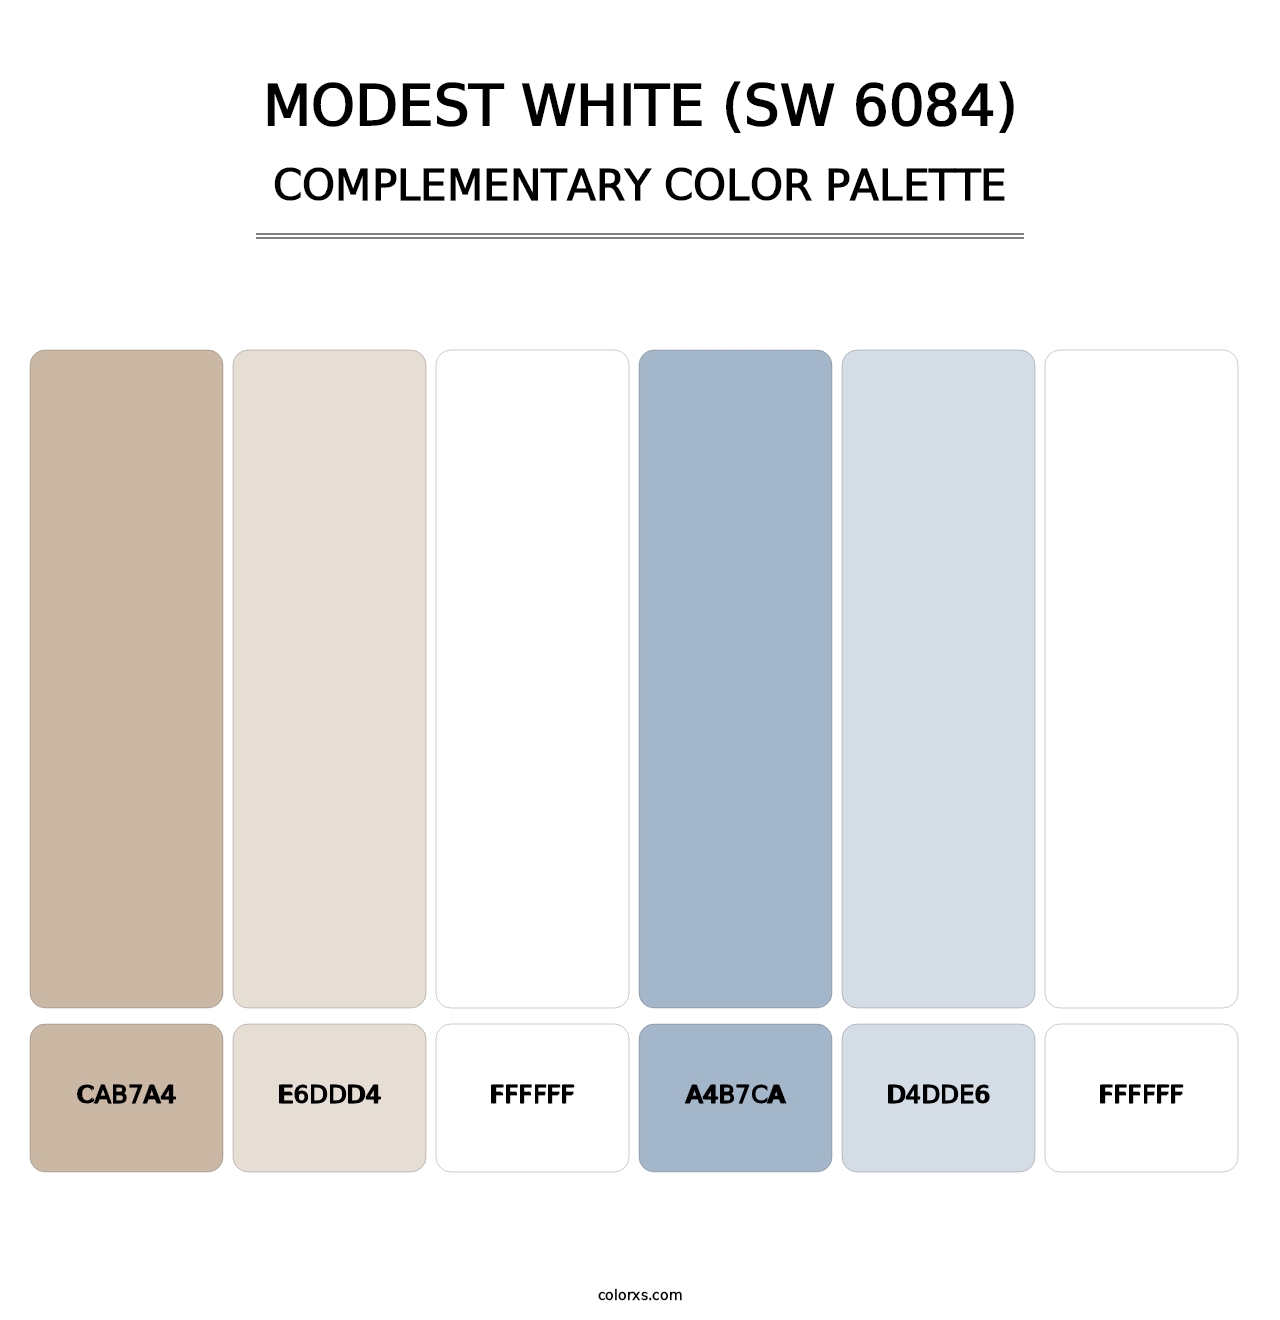 Modest White (SW 6084) - Complementary Color Palette